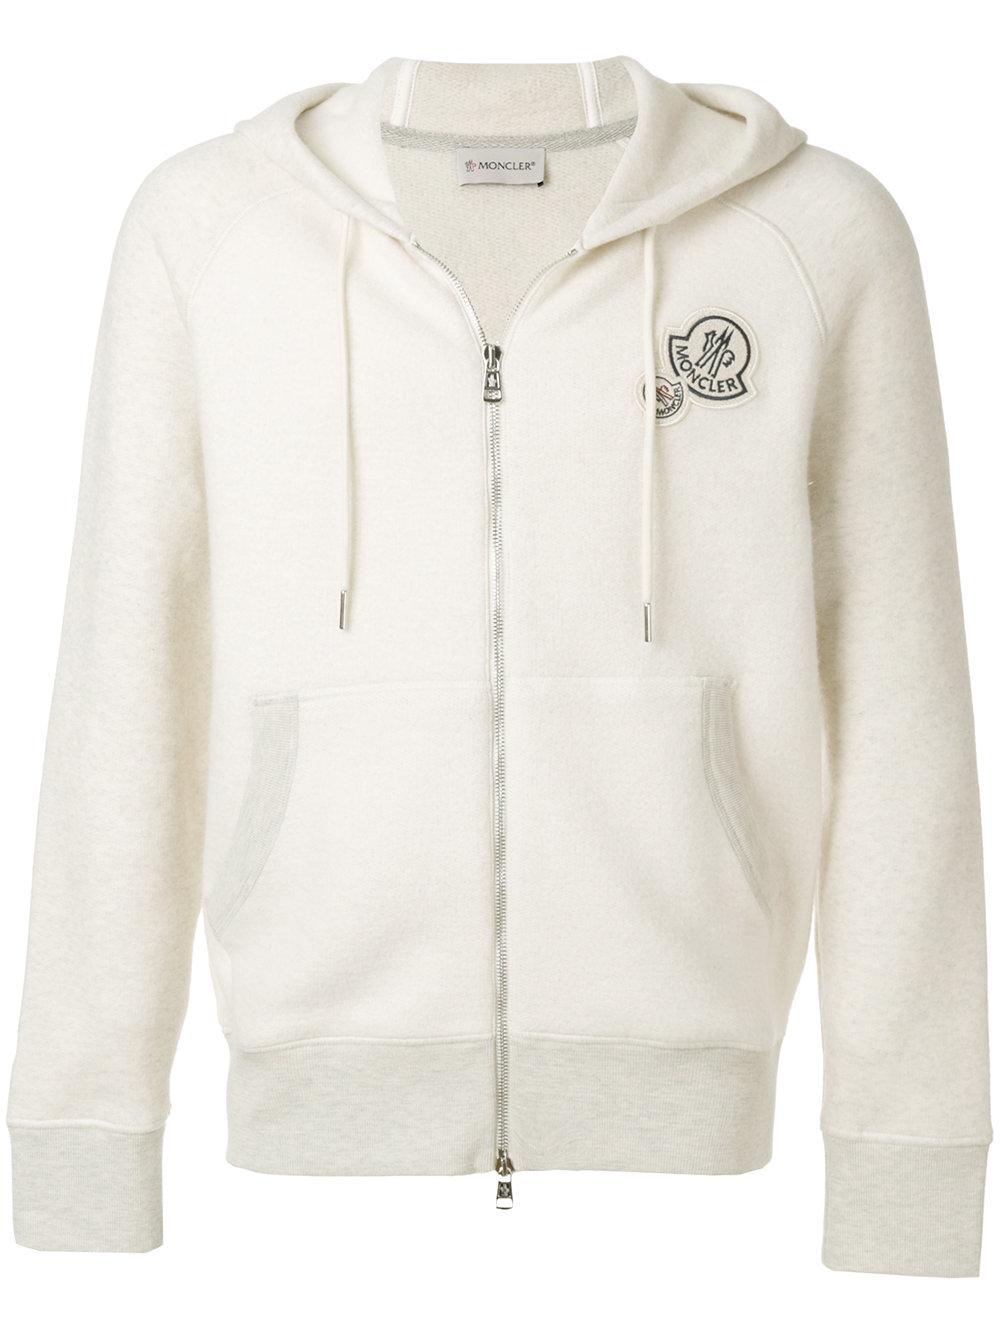 Lyst - Moncler Logo Patch Zipped Hoodie for Men